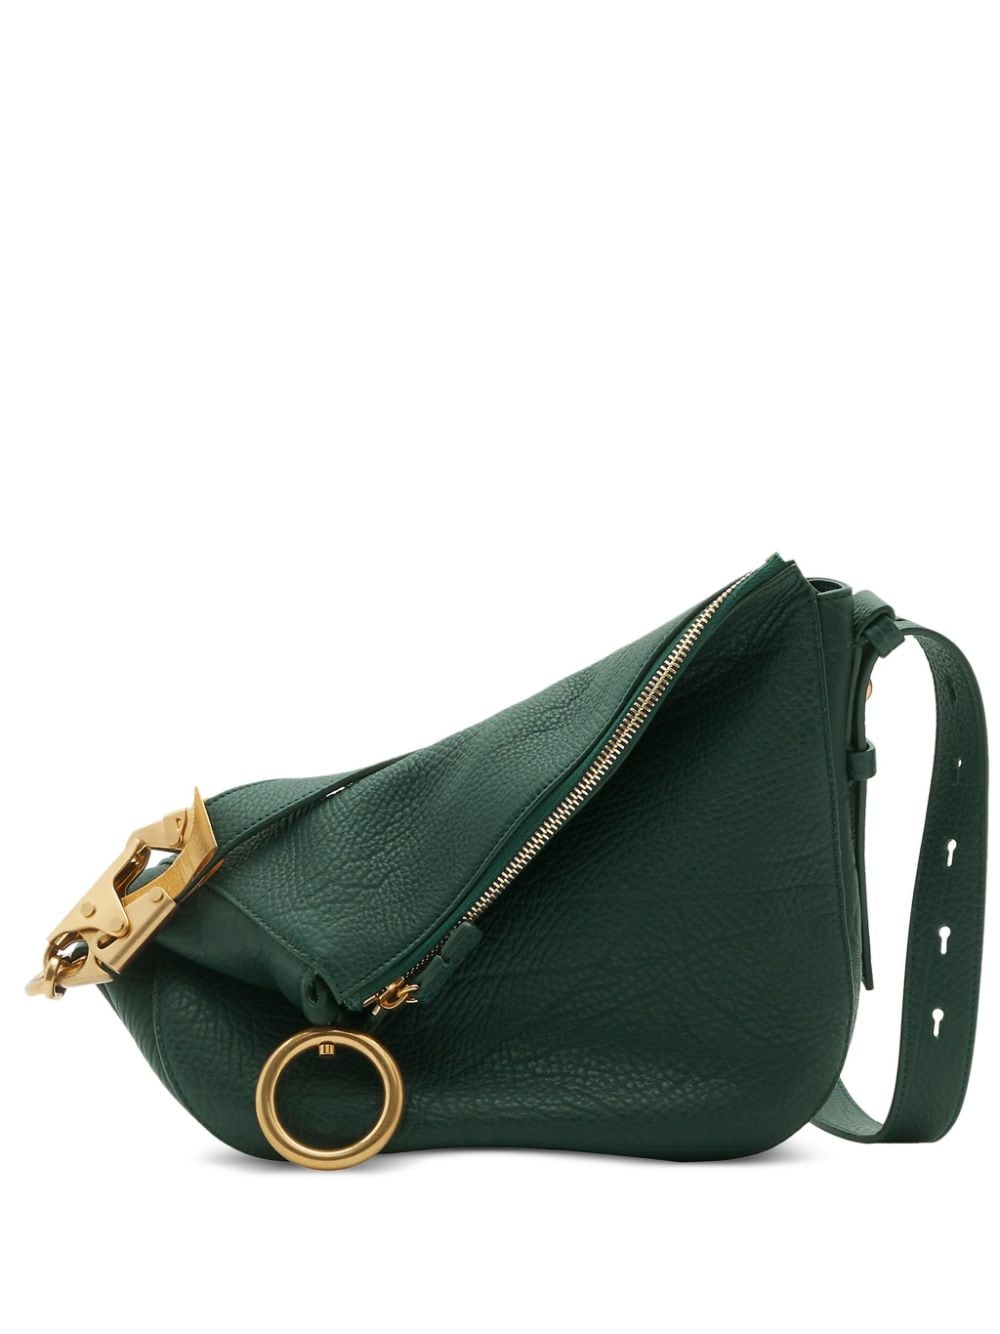 Burberry small Knight leather shoulder bag - Green von Burberry